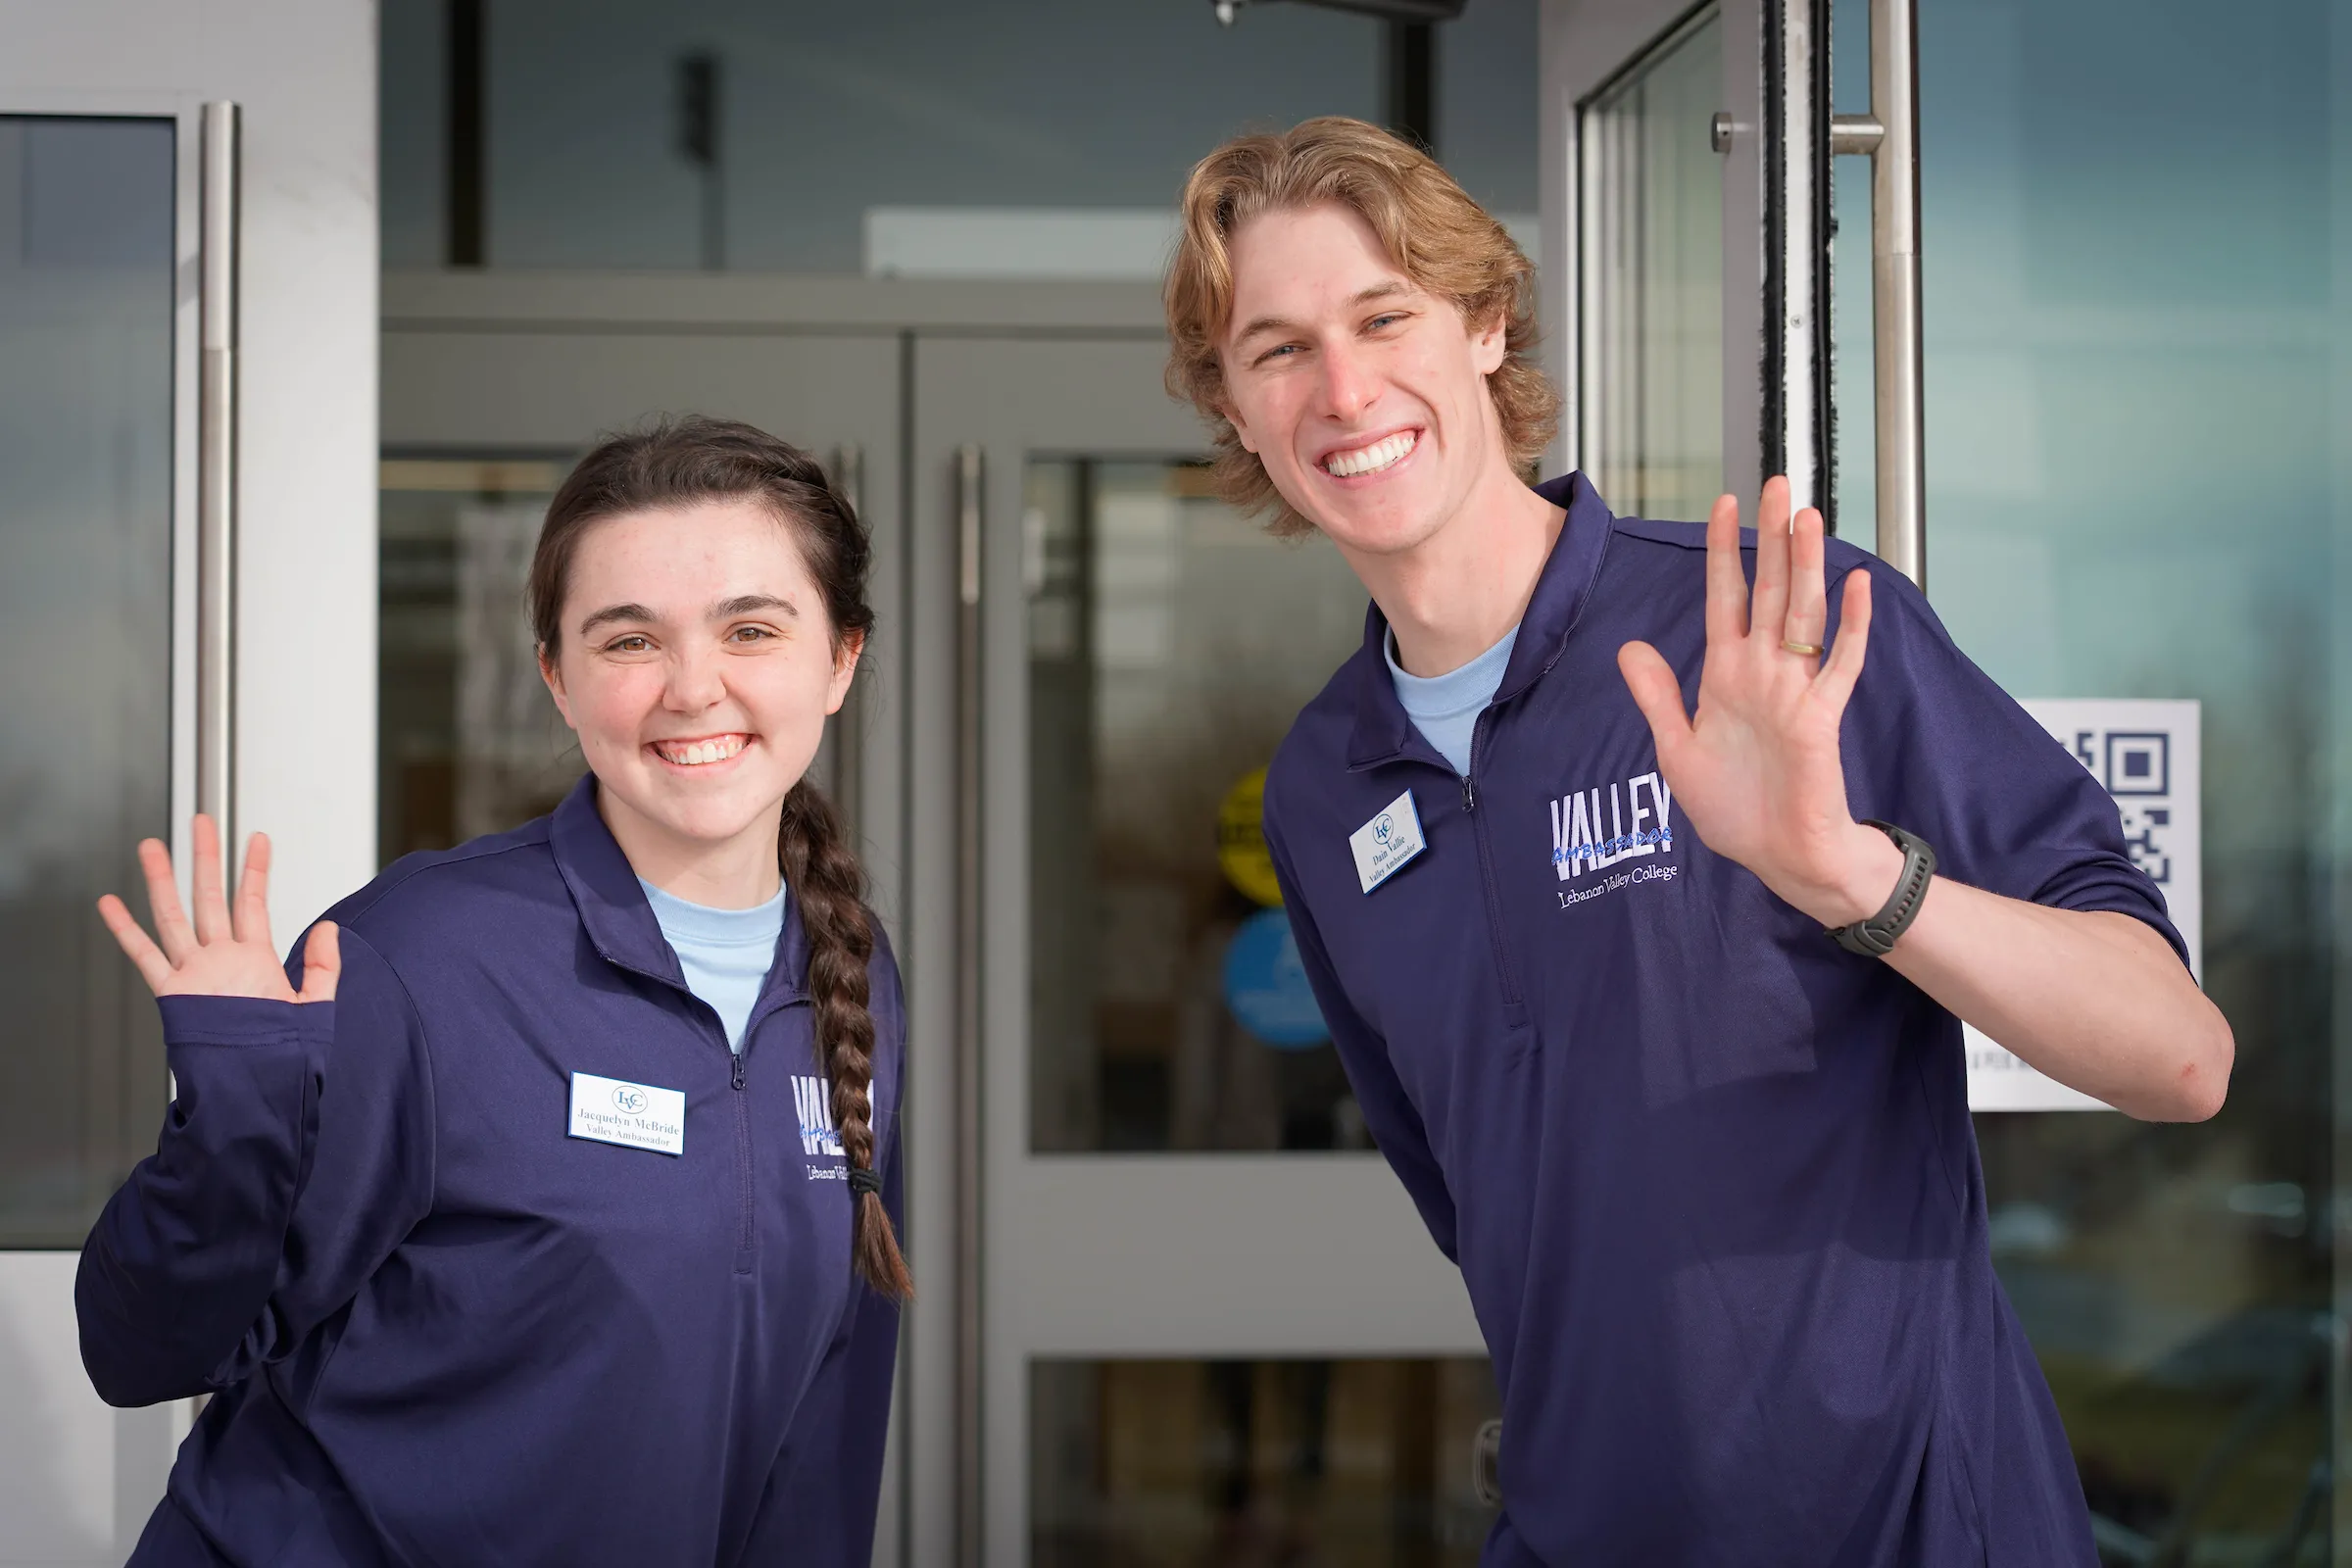 LVC Valley Ambassadors smile and wave at LVC Live admitted student event